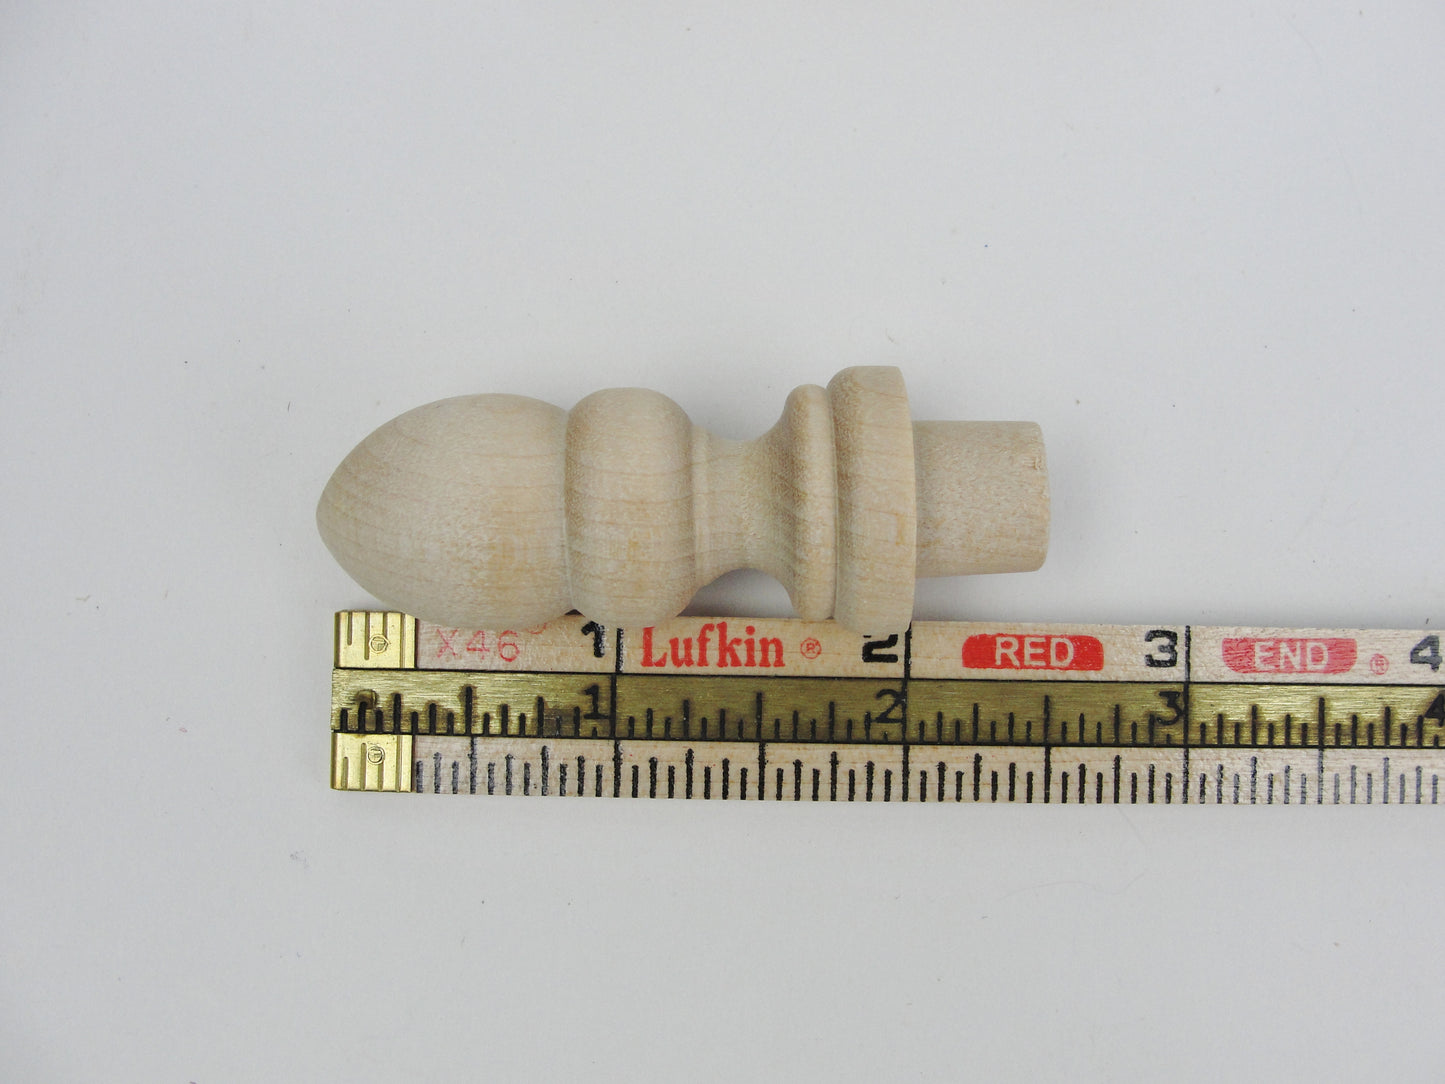 Small wooden acorn top finial set of 4